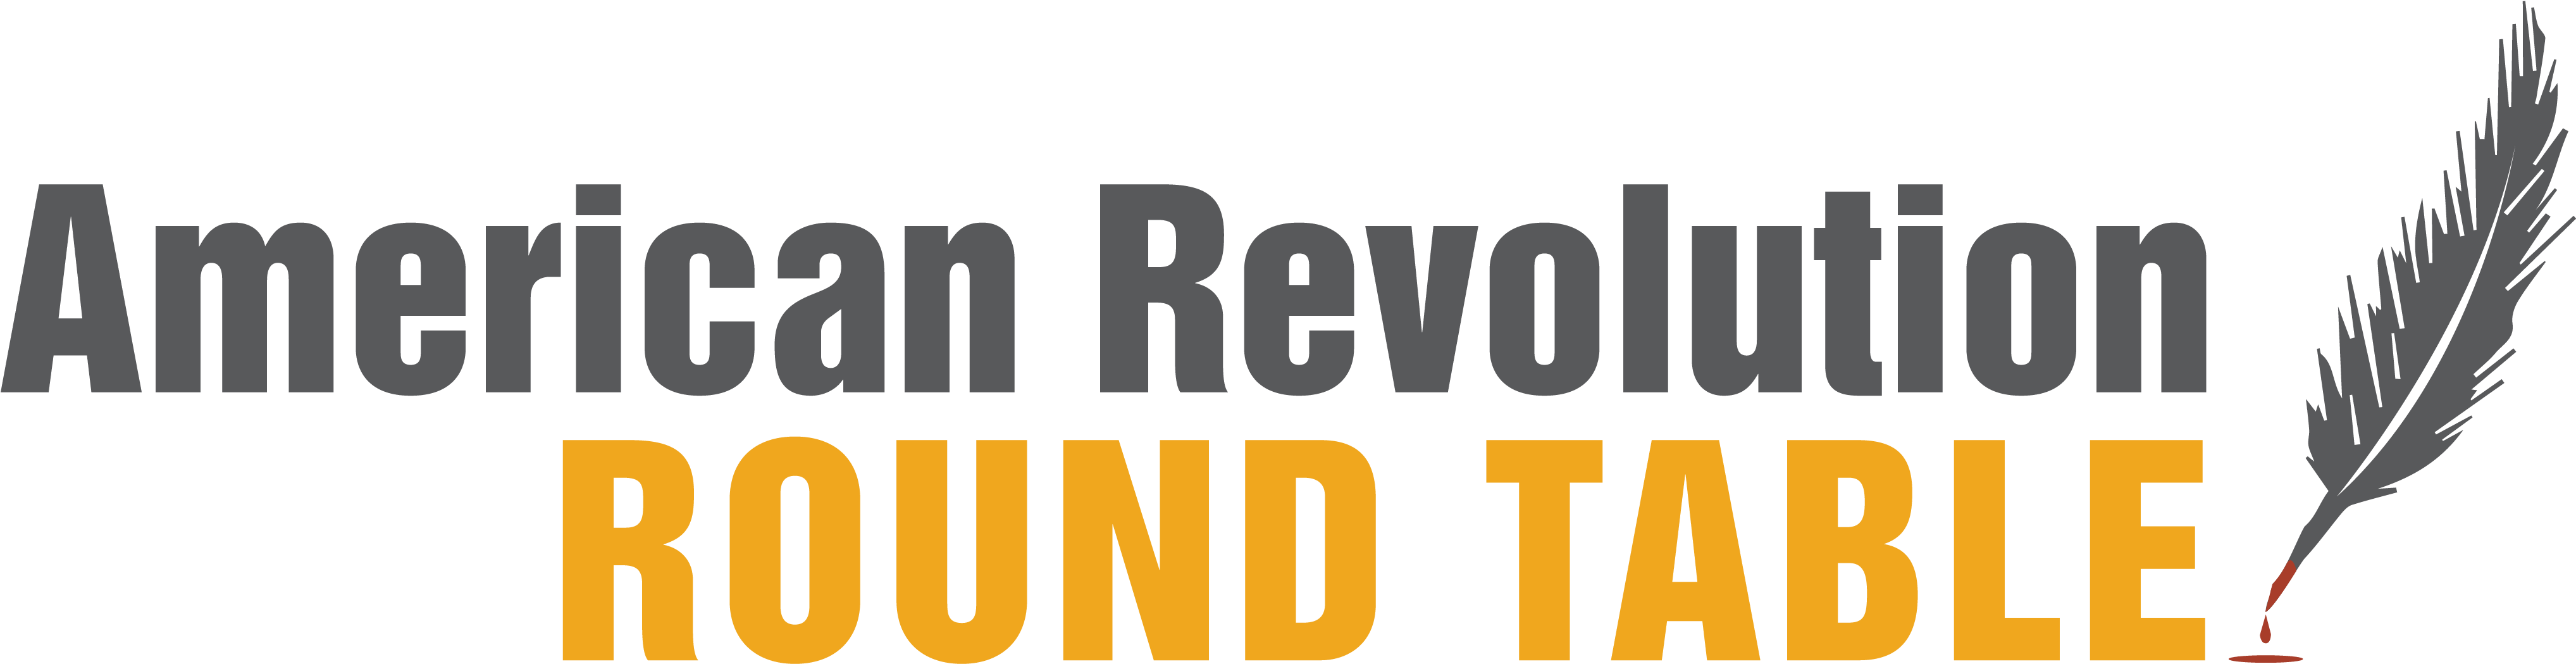 American Revolution Round Table Logo PNG